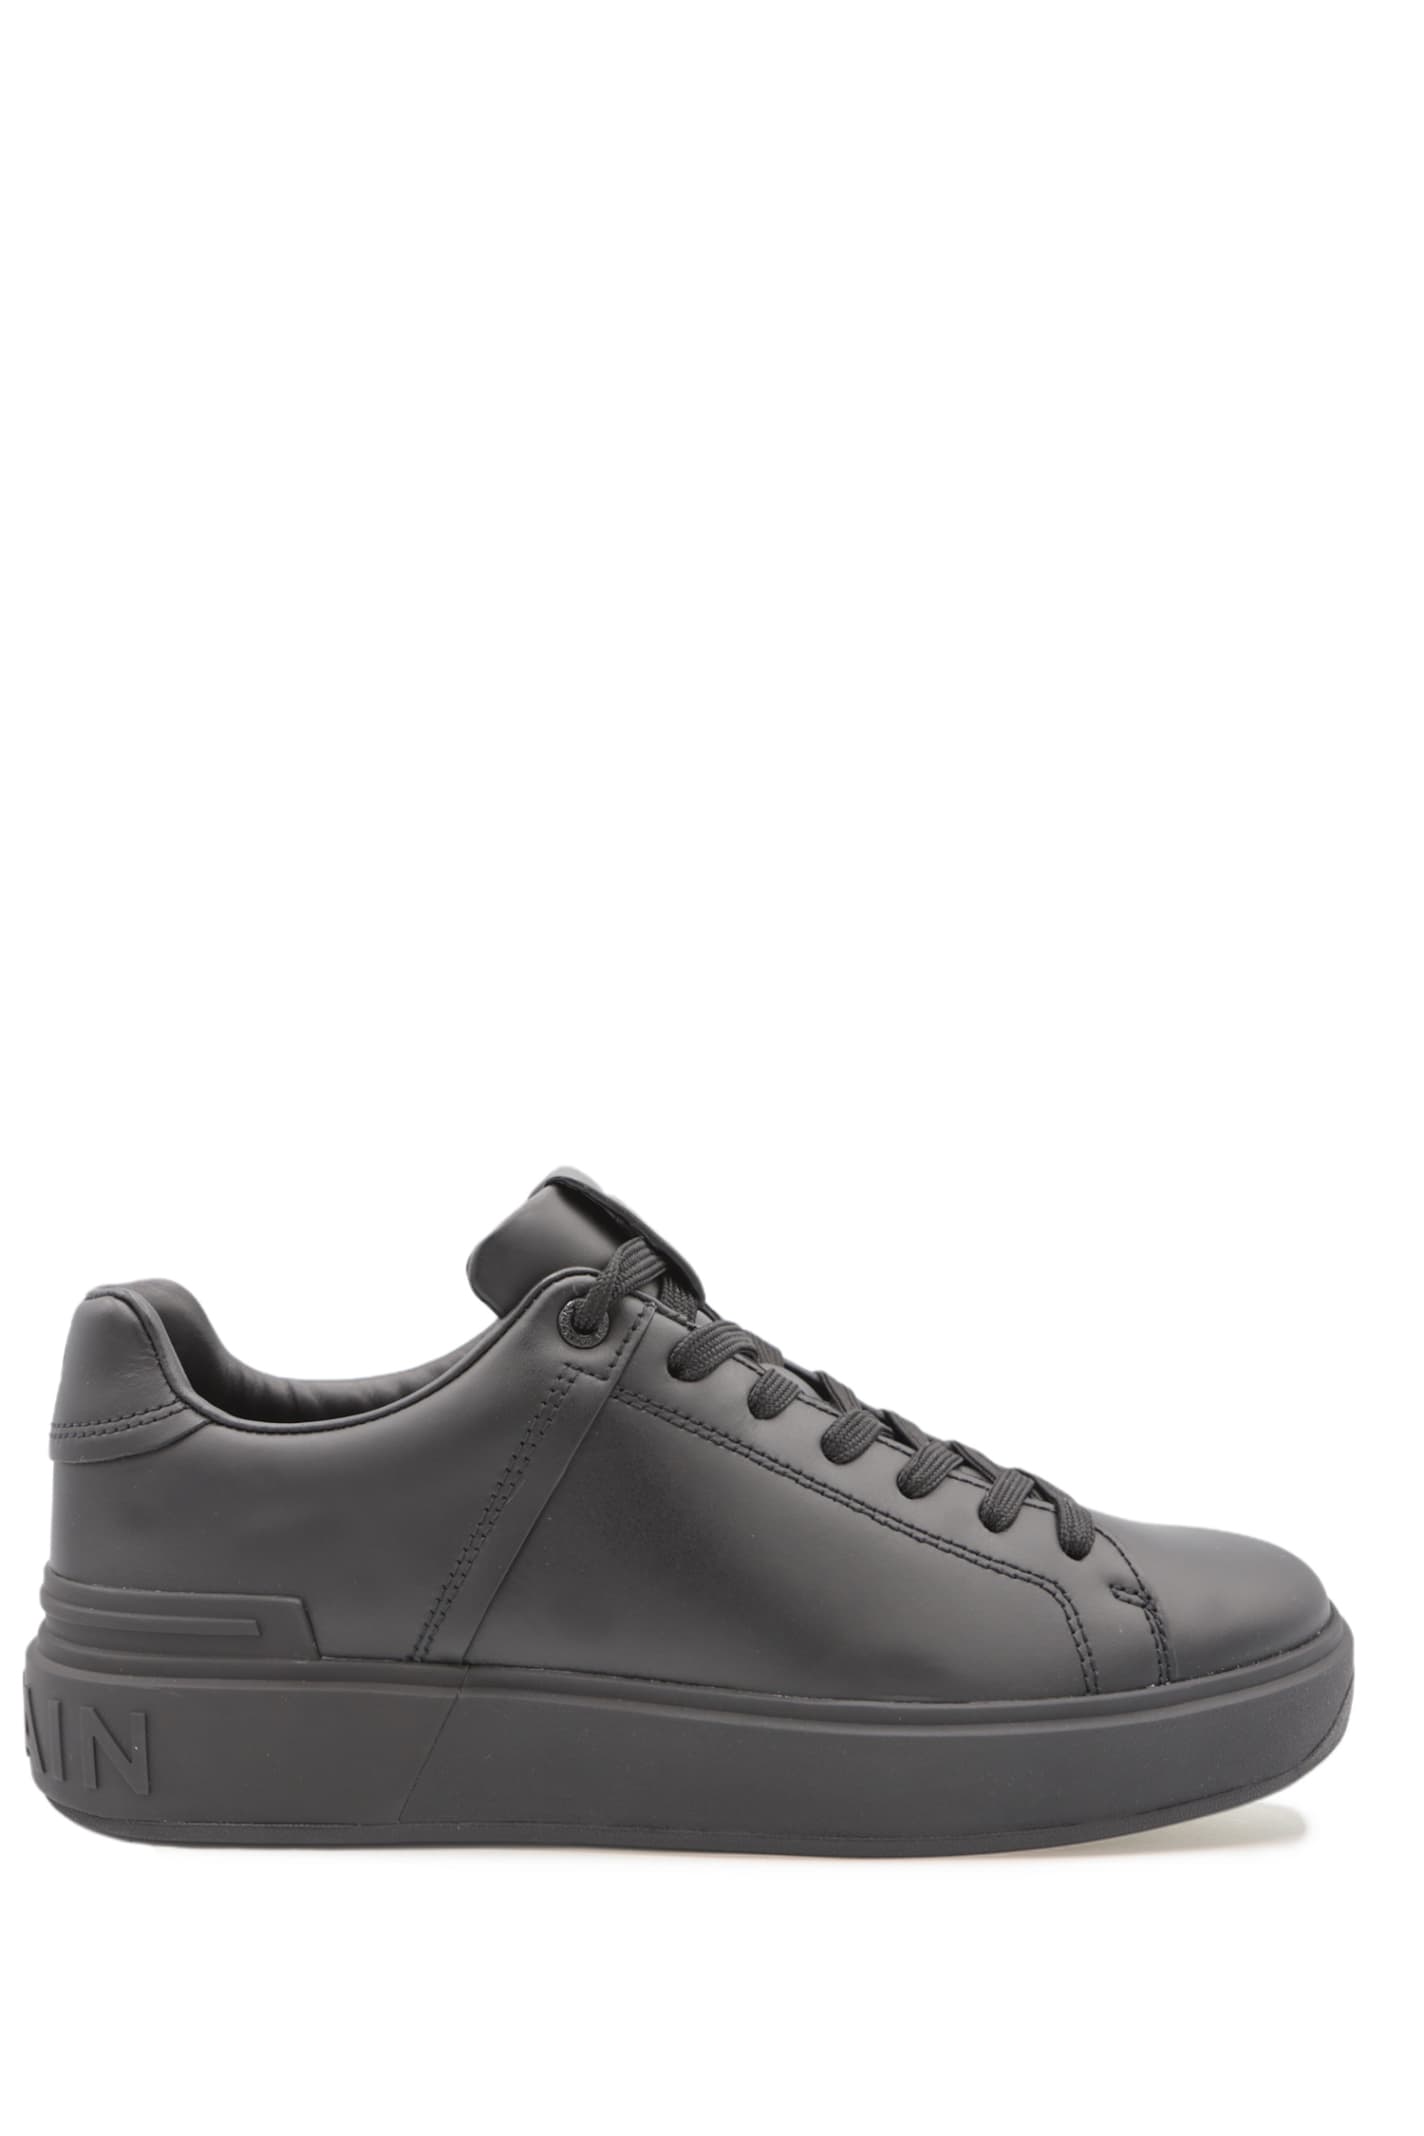 Balmain Smooth Black Leather B-court Sneakers